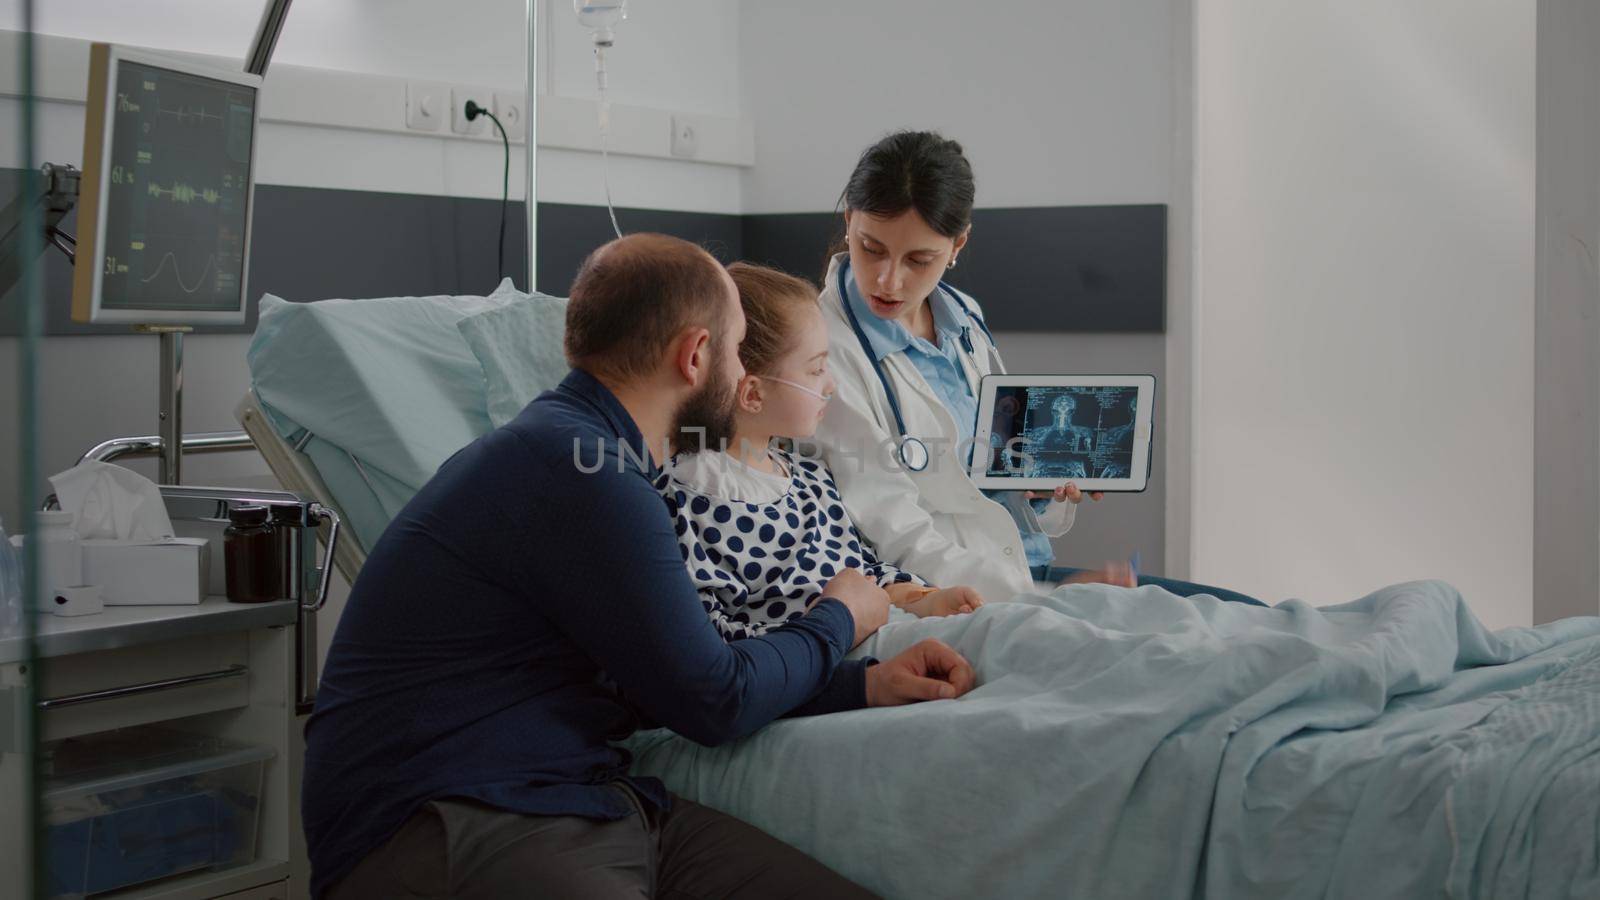 Physician woman doctor explaining medical radiography discussing healthcare treatment monitoring symptoms during recovery examination in hospital ward. Hospitalized child having breathing illness